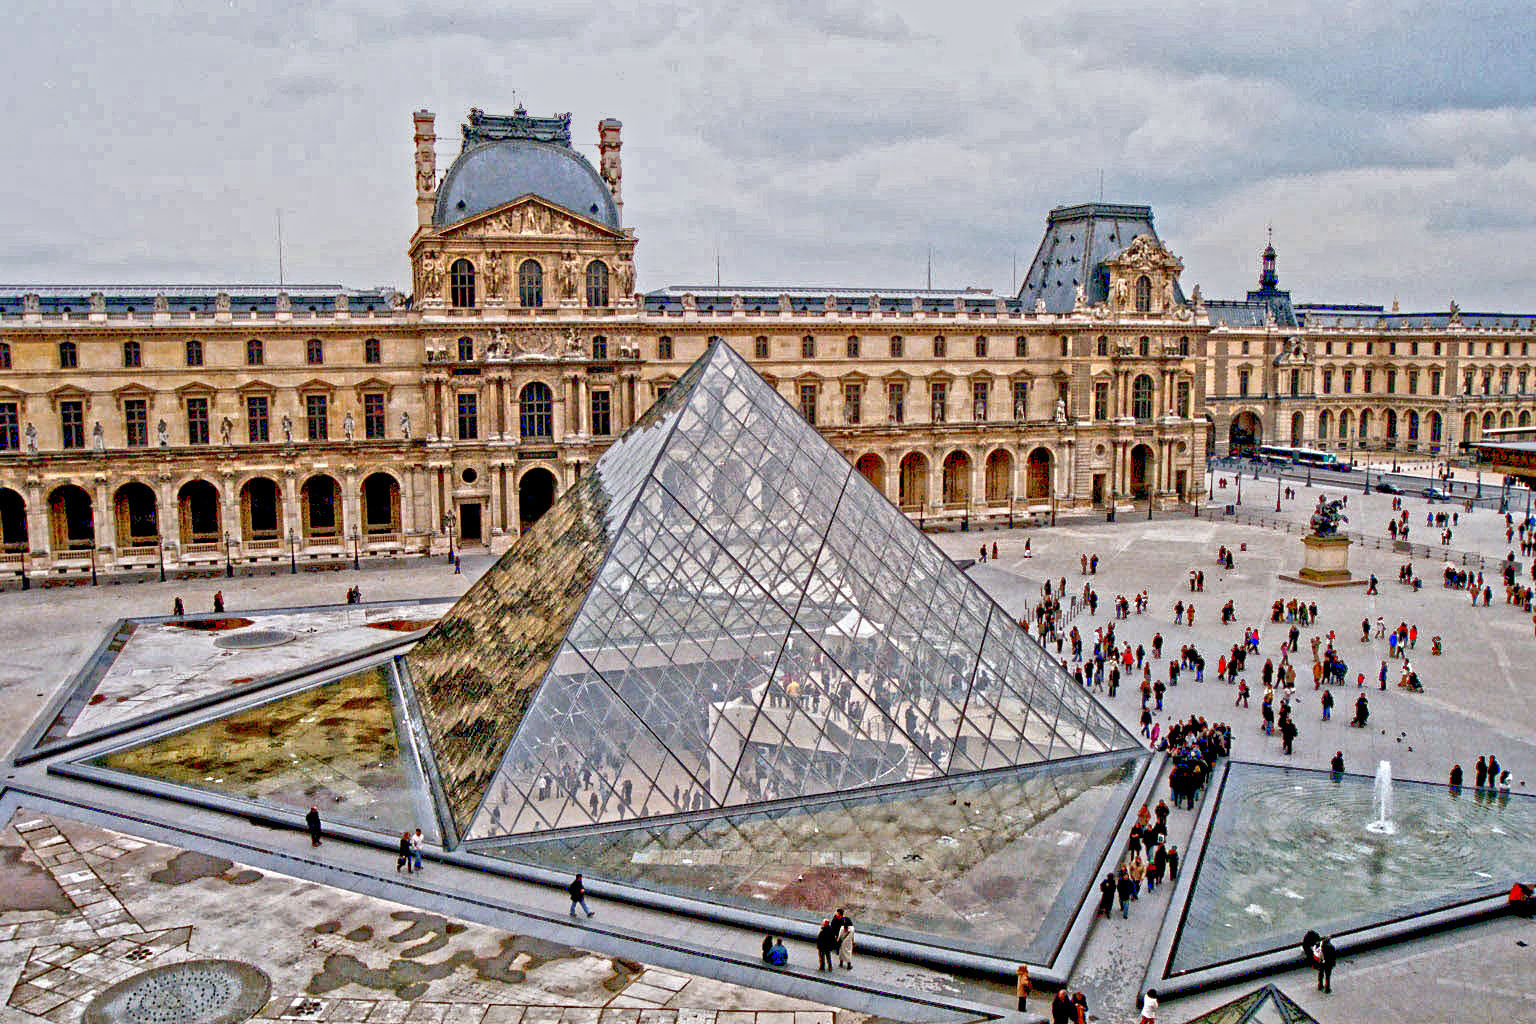 The Louvre Palace & the Louvre Pyramid